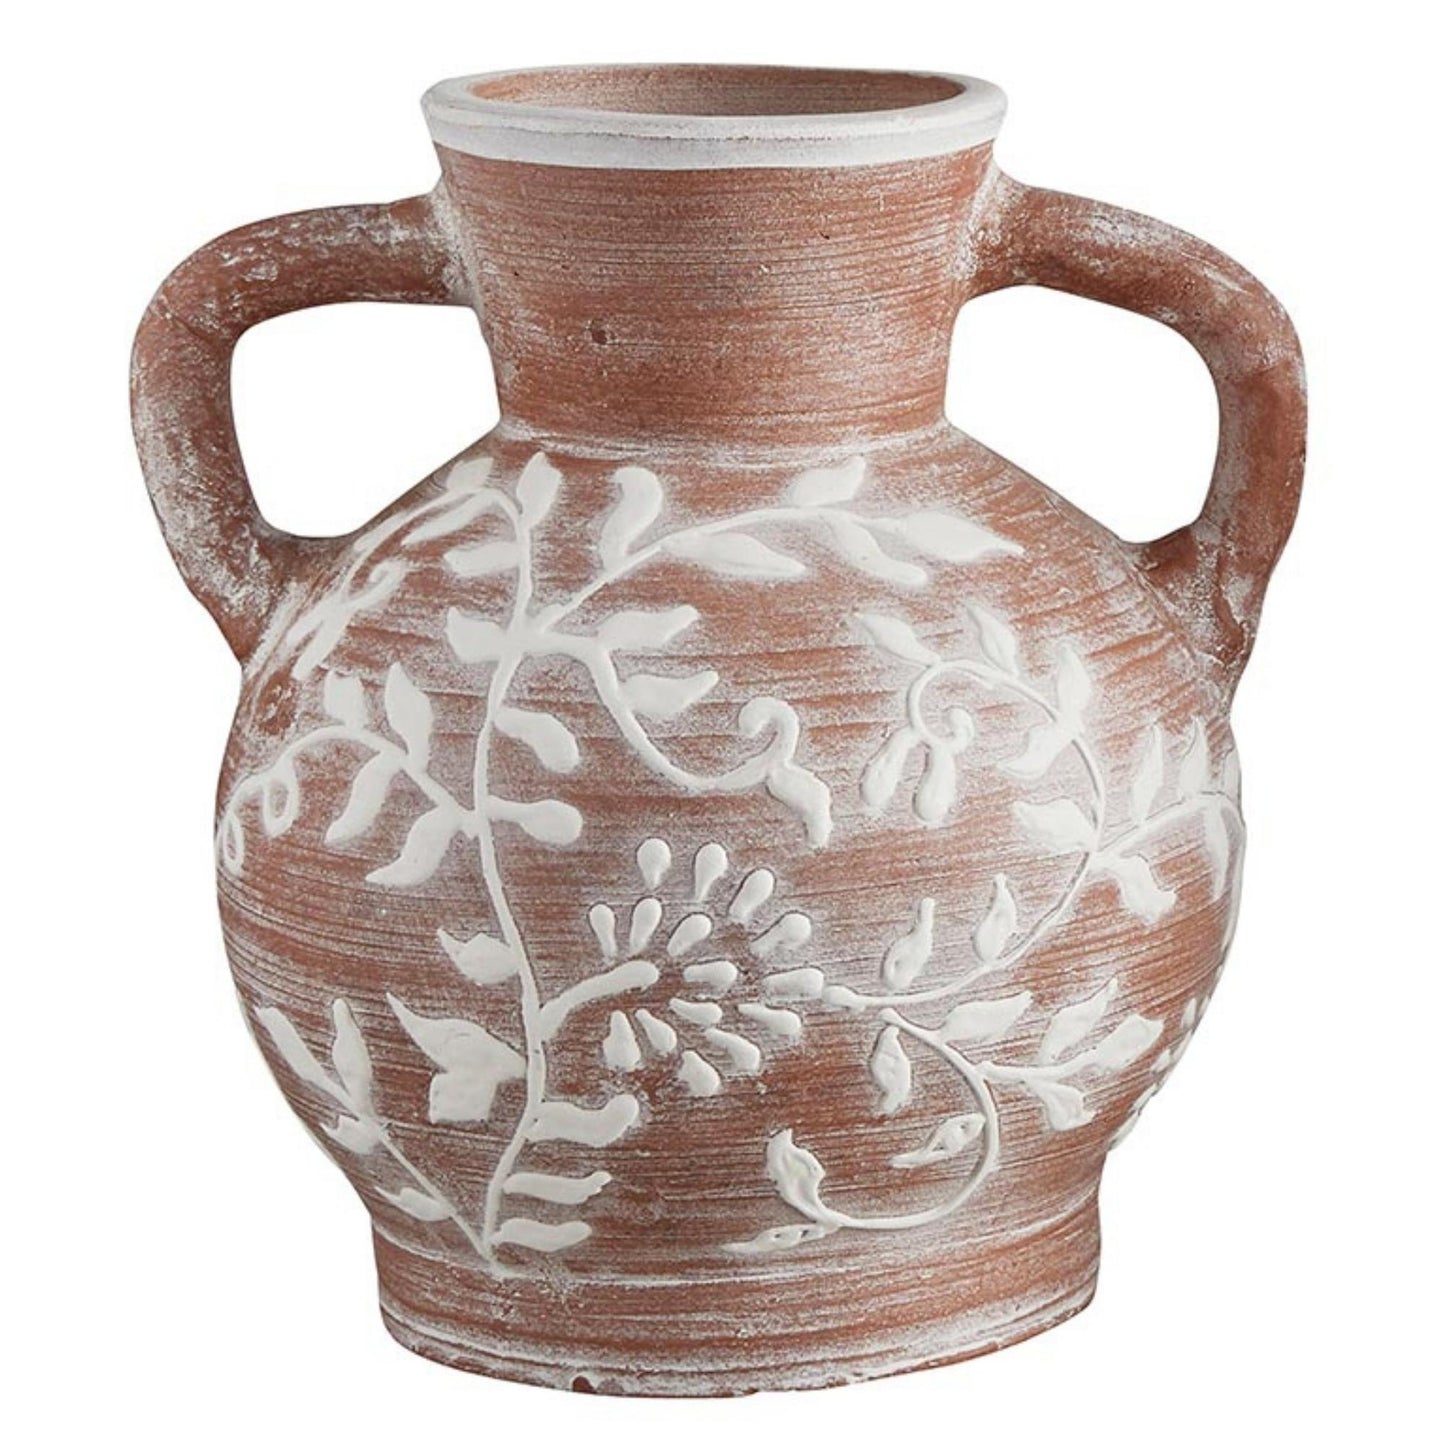 Earthy Terracotta Vases with Textured White Floral Design - 3 Designs to Choose From | Two Handle Terra Cotta Vase Shown | InsideOutCatalog.com